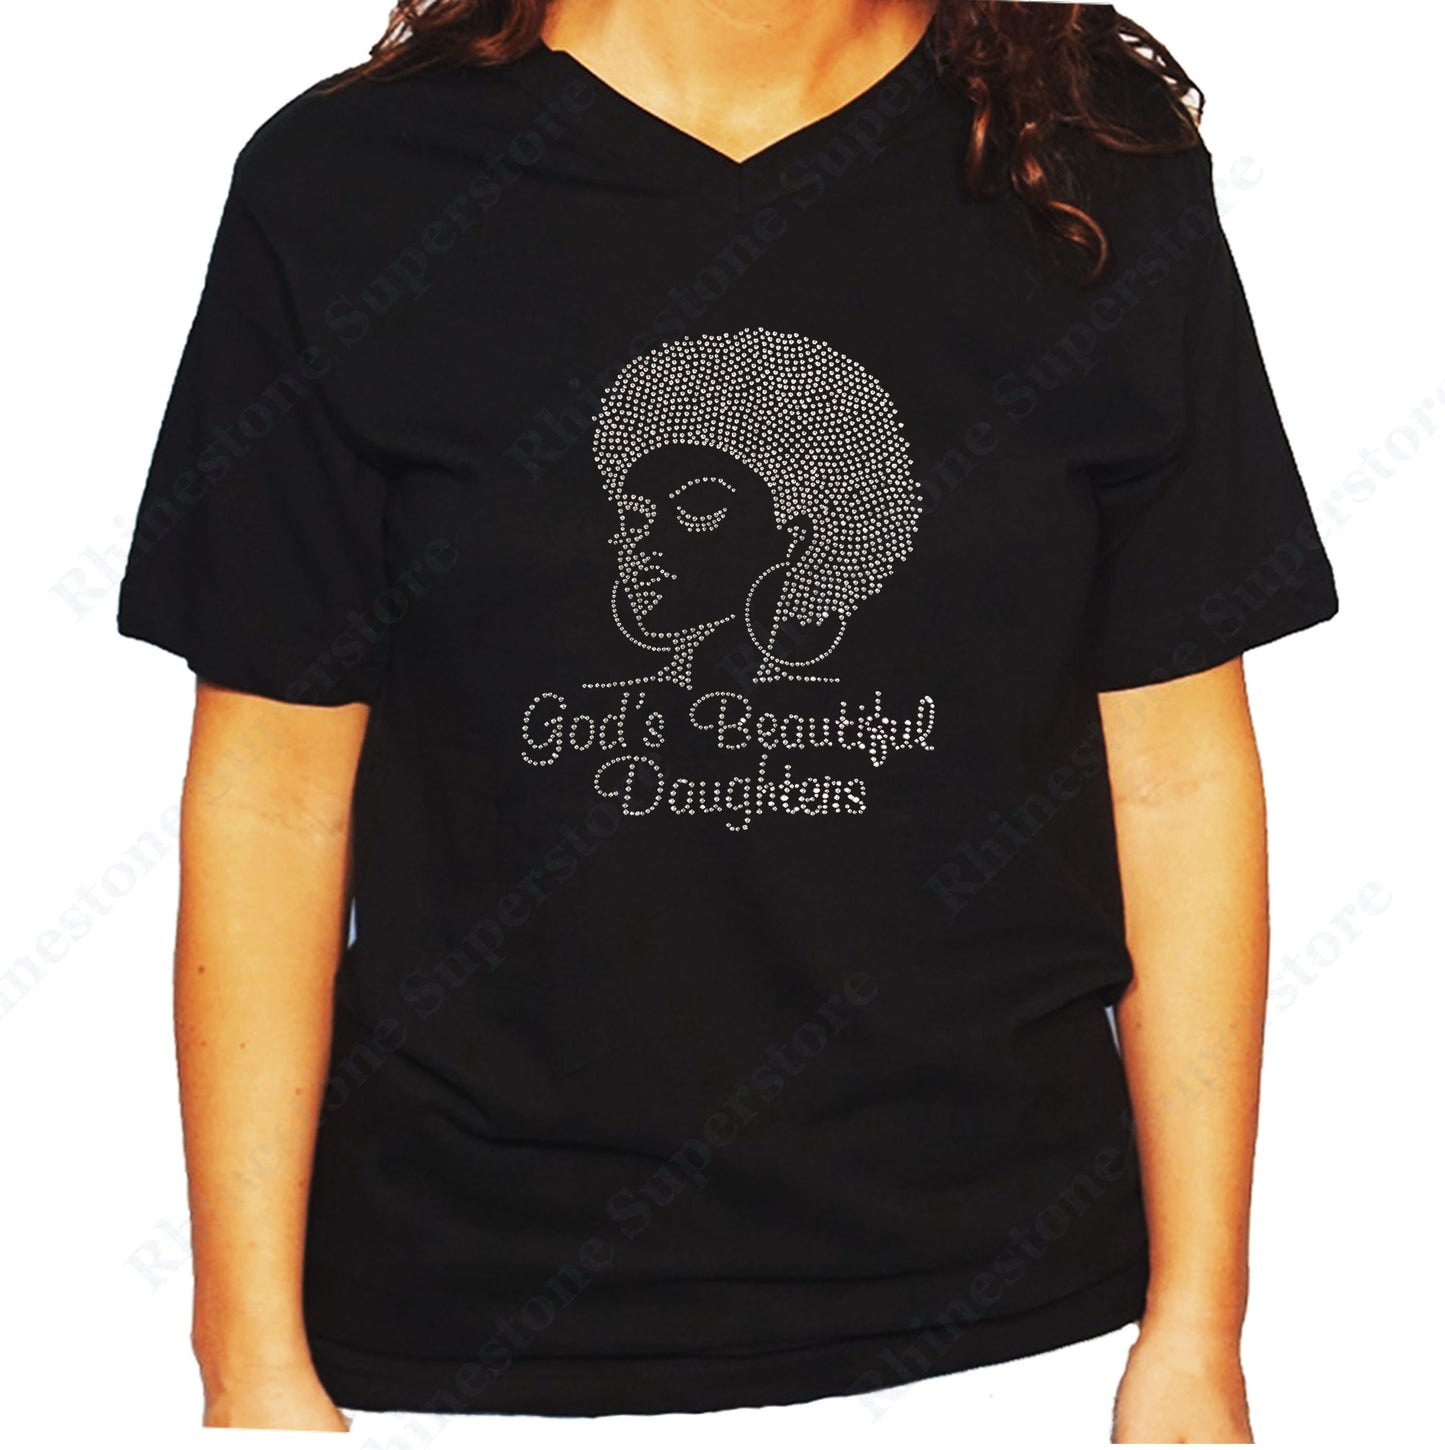 Women's / Unisex T-Shirt with Afro Girl with God's Beautiful Daughters in Rhinestones